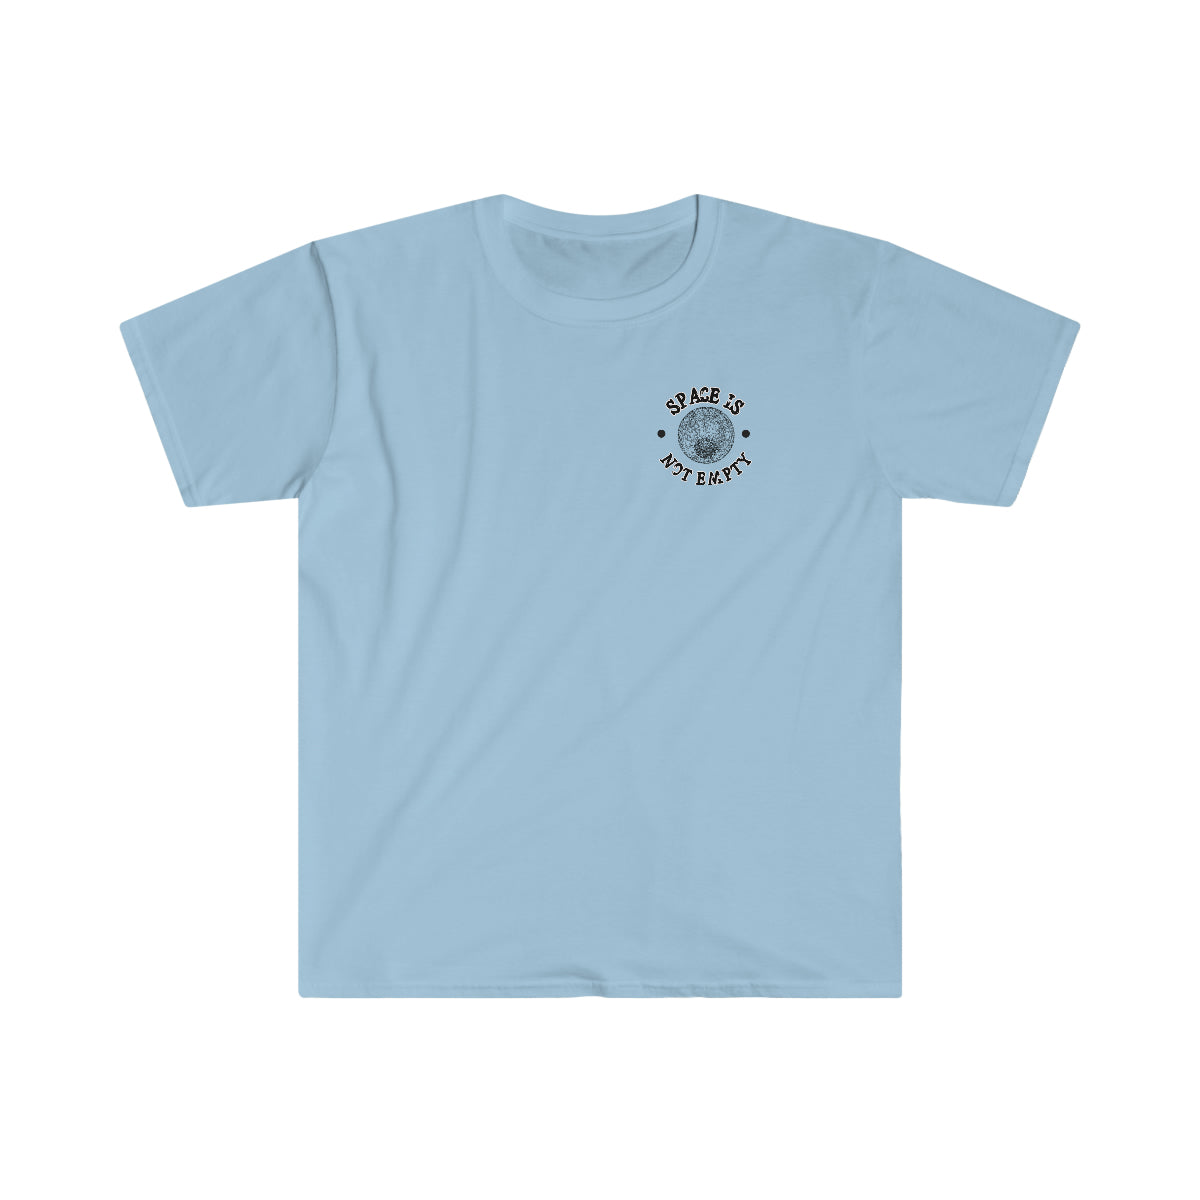 A light blue Getting Ready to Love Again T-Shirt with a logo.